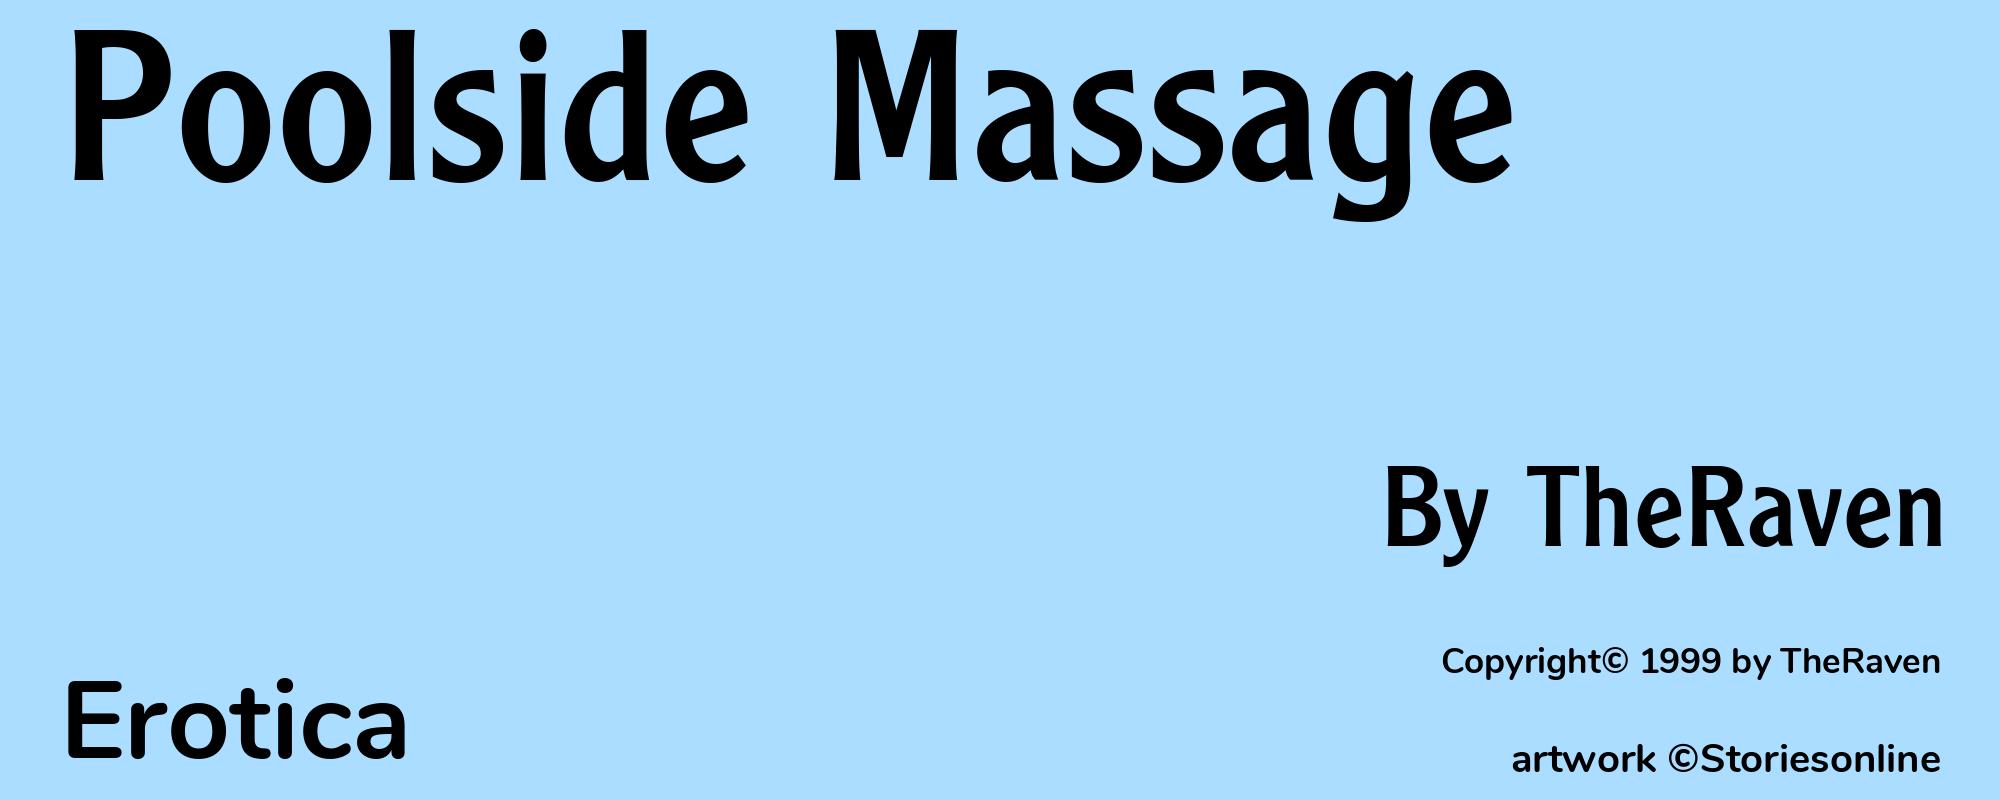 Poolside Massage - Cover